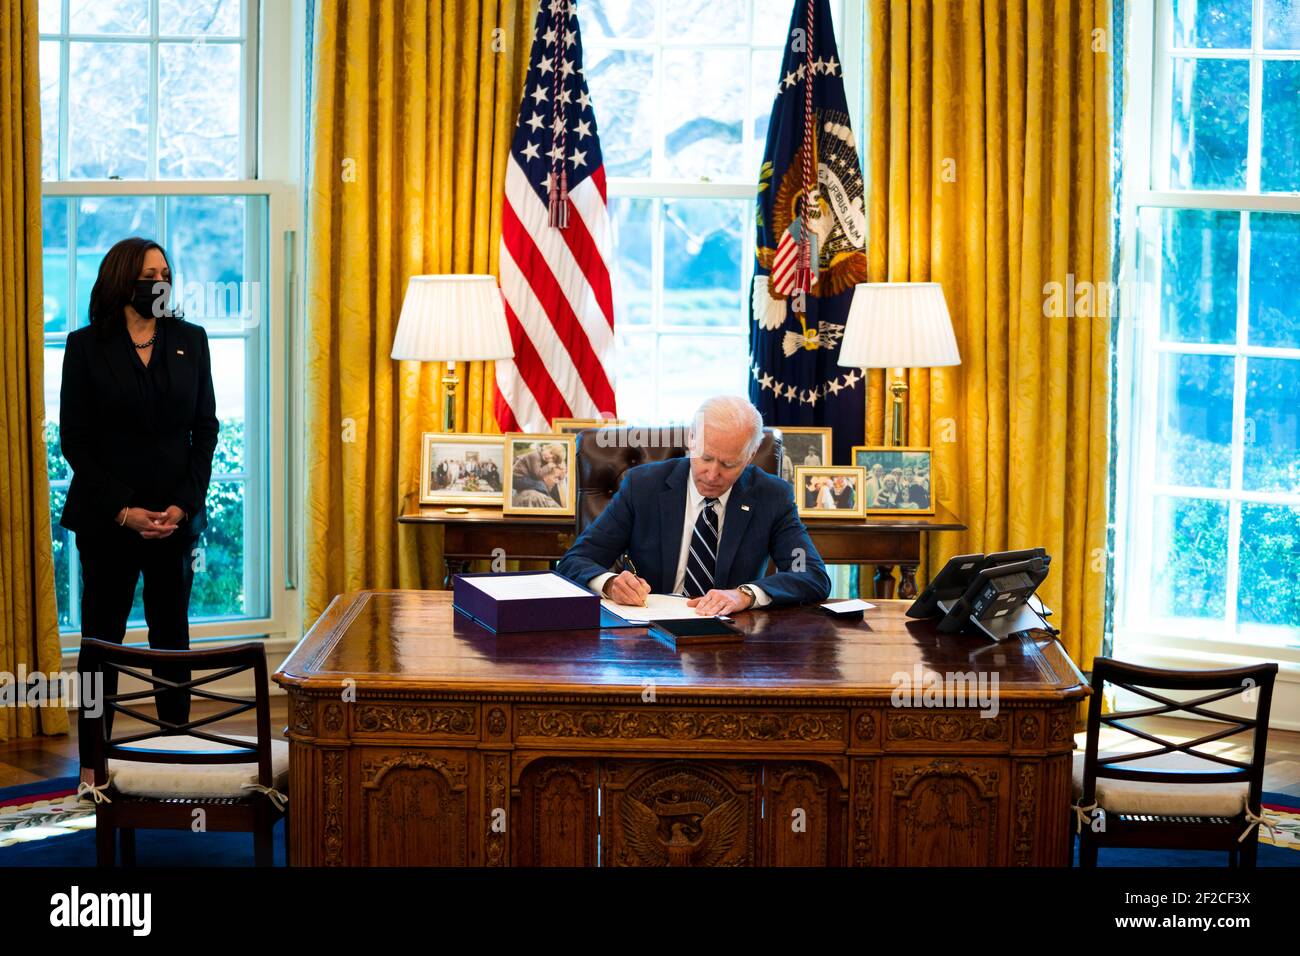 Washington, United States Of America. 11th Mar, 2021. United States President Joe Biden signs the American Rescue Plan with Vice President Kamala Harris looking on in the Oval Office, Thursday, March, 11, 2021. Credit: Doug Mills/Pool via CNP | usage worldwide Credit: dpa/Alamy Live News Stock Photo